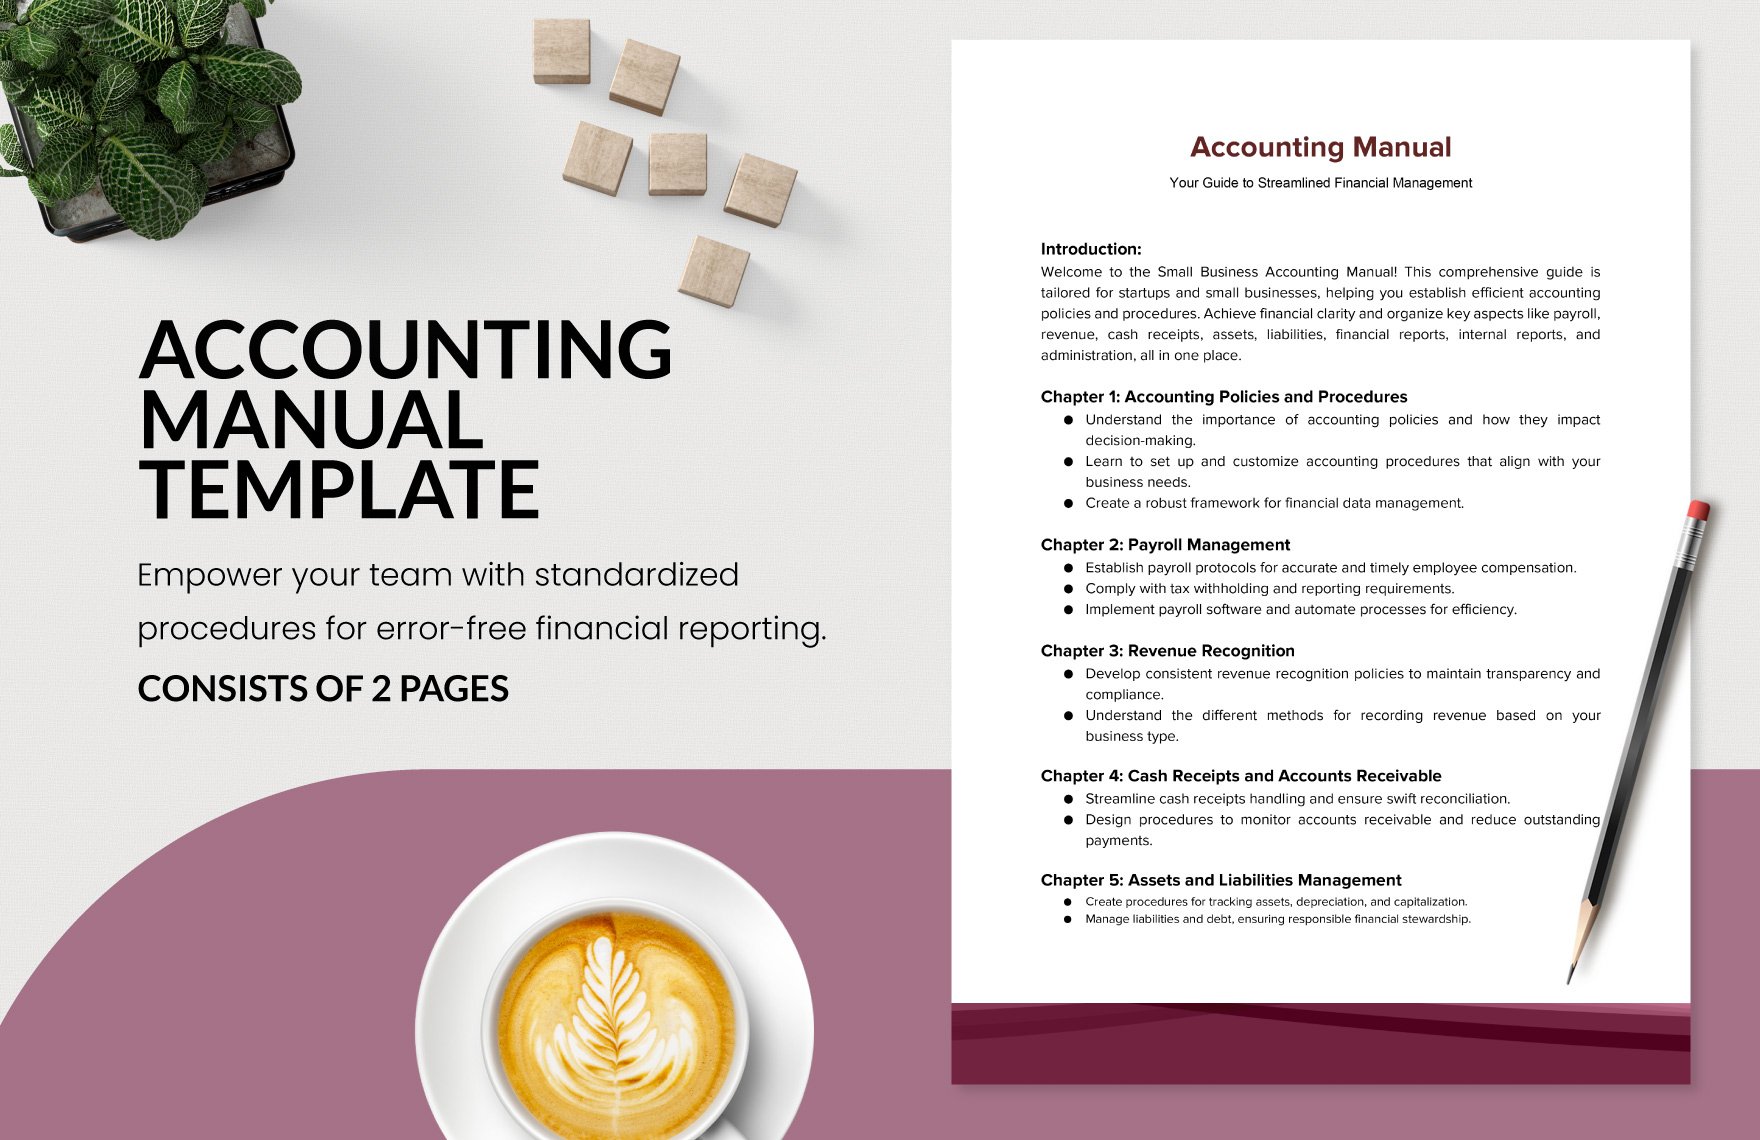 Accounting Manual Template in Word, Google Docs, PDF